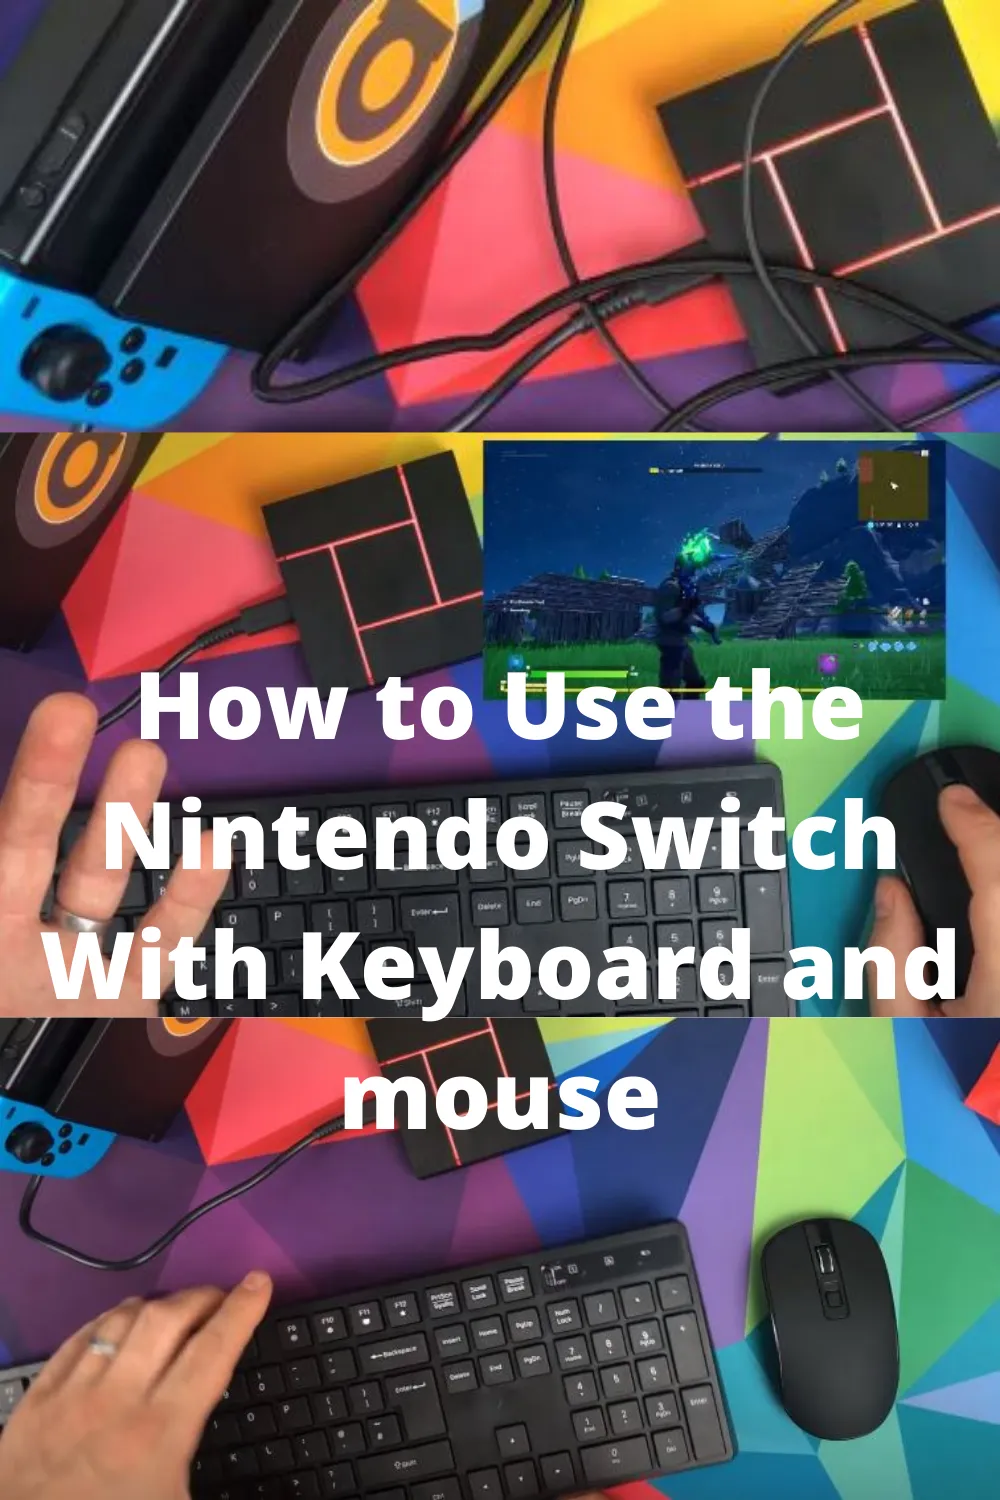 How to Use Nintendo Switch With a Keyboard and Mouse